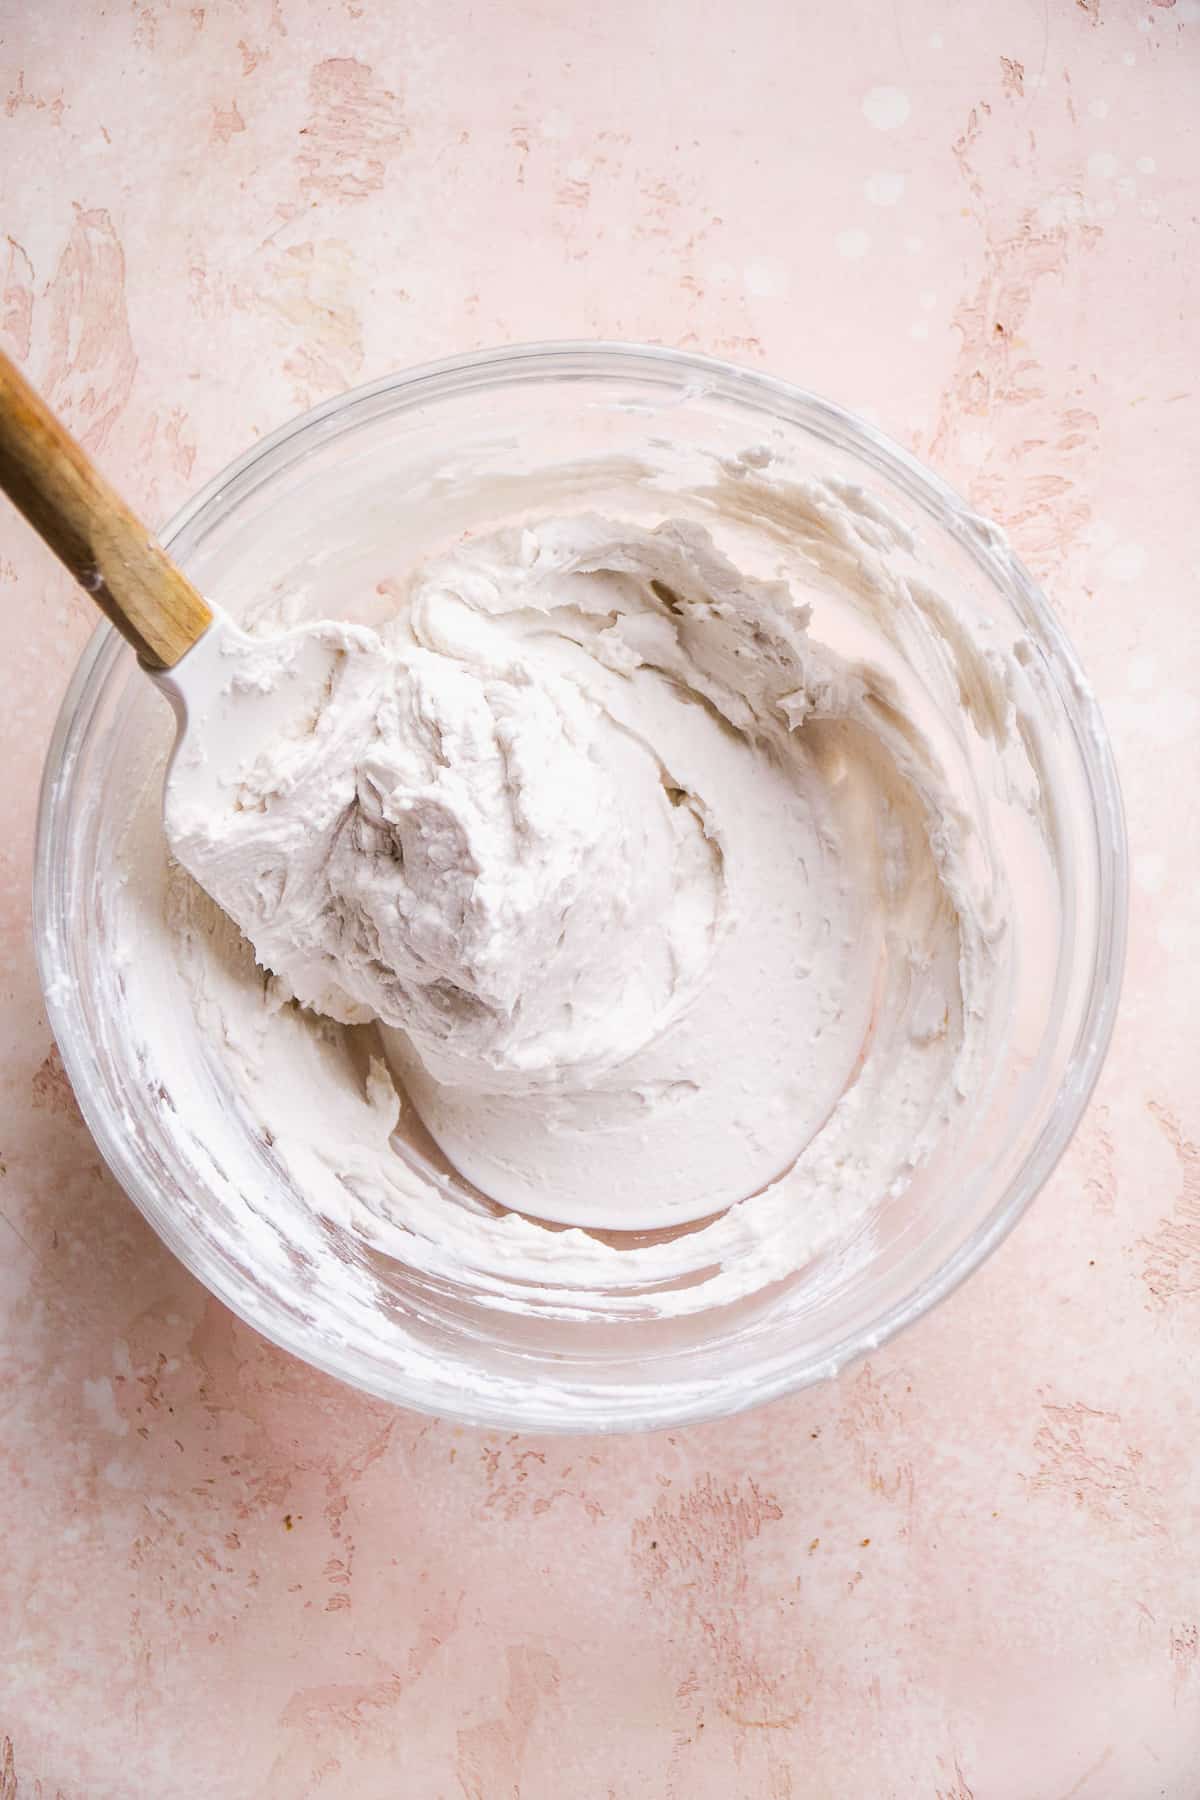 Coconut whipped cream in a glass mixing bowl with a spatula.